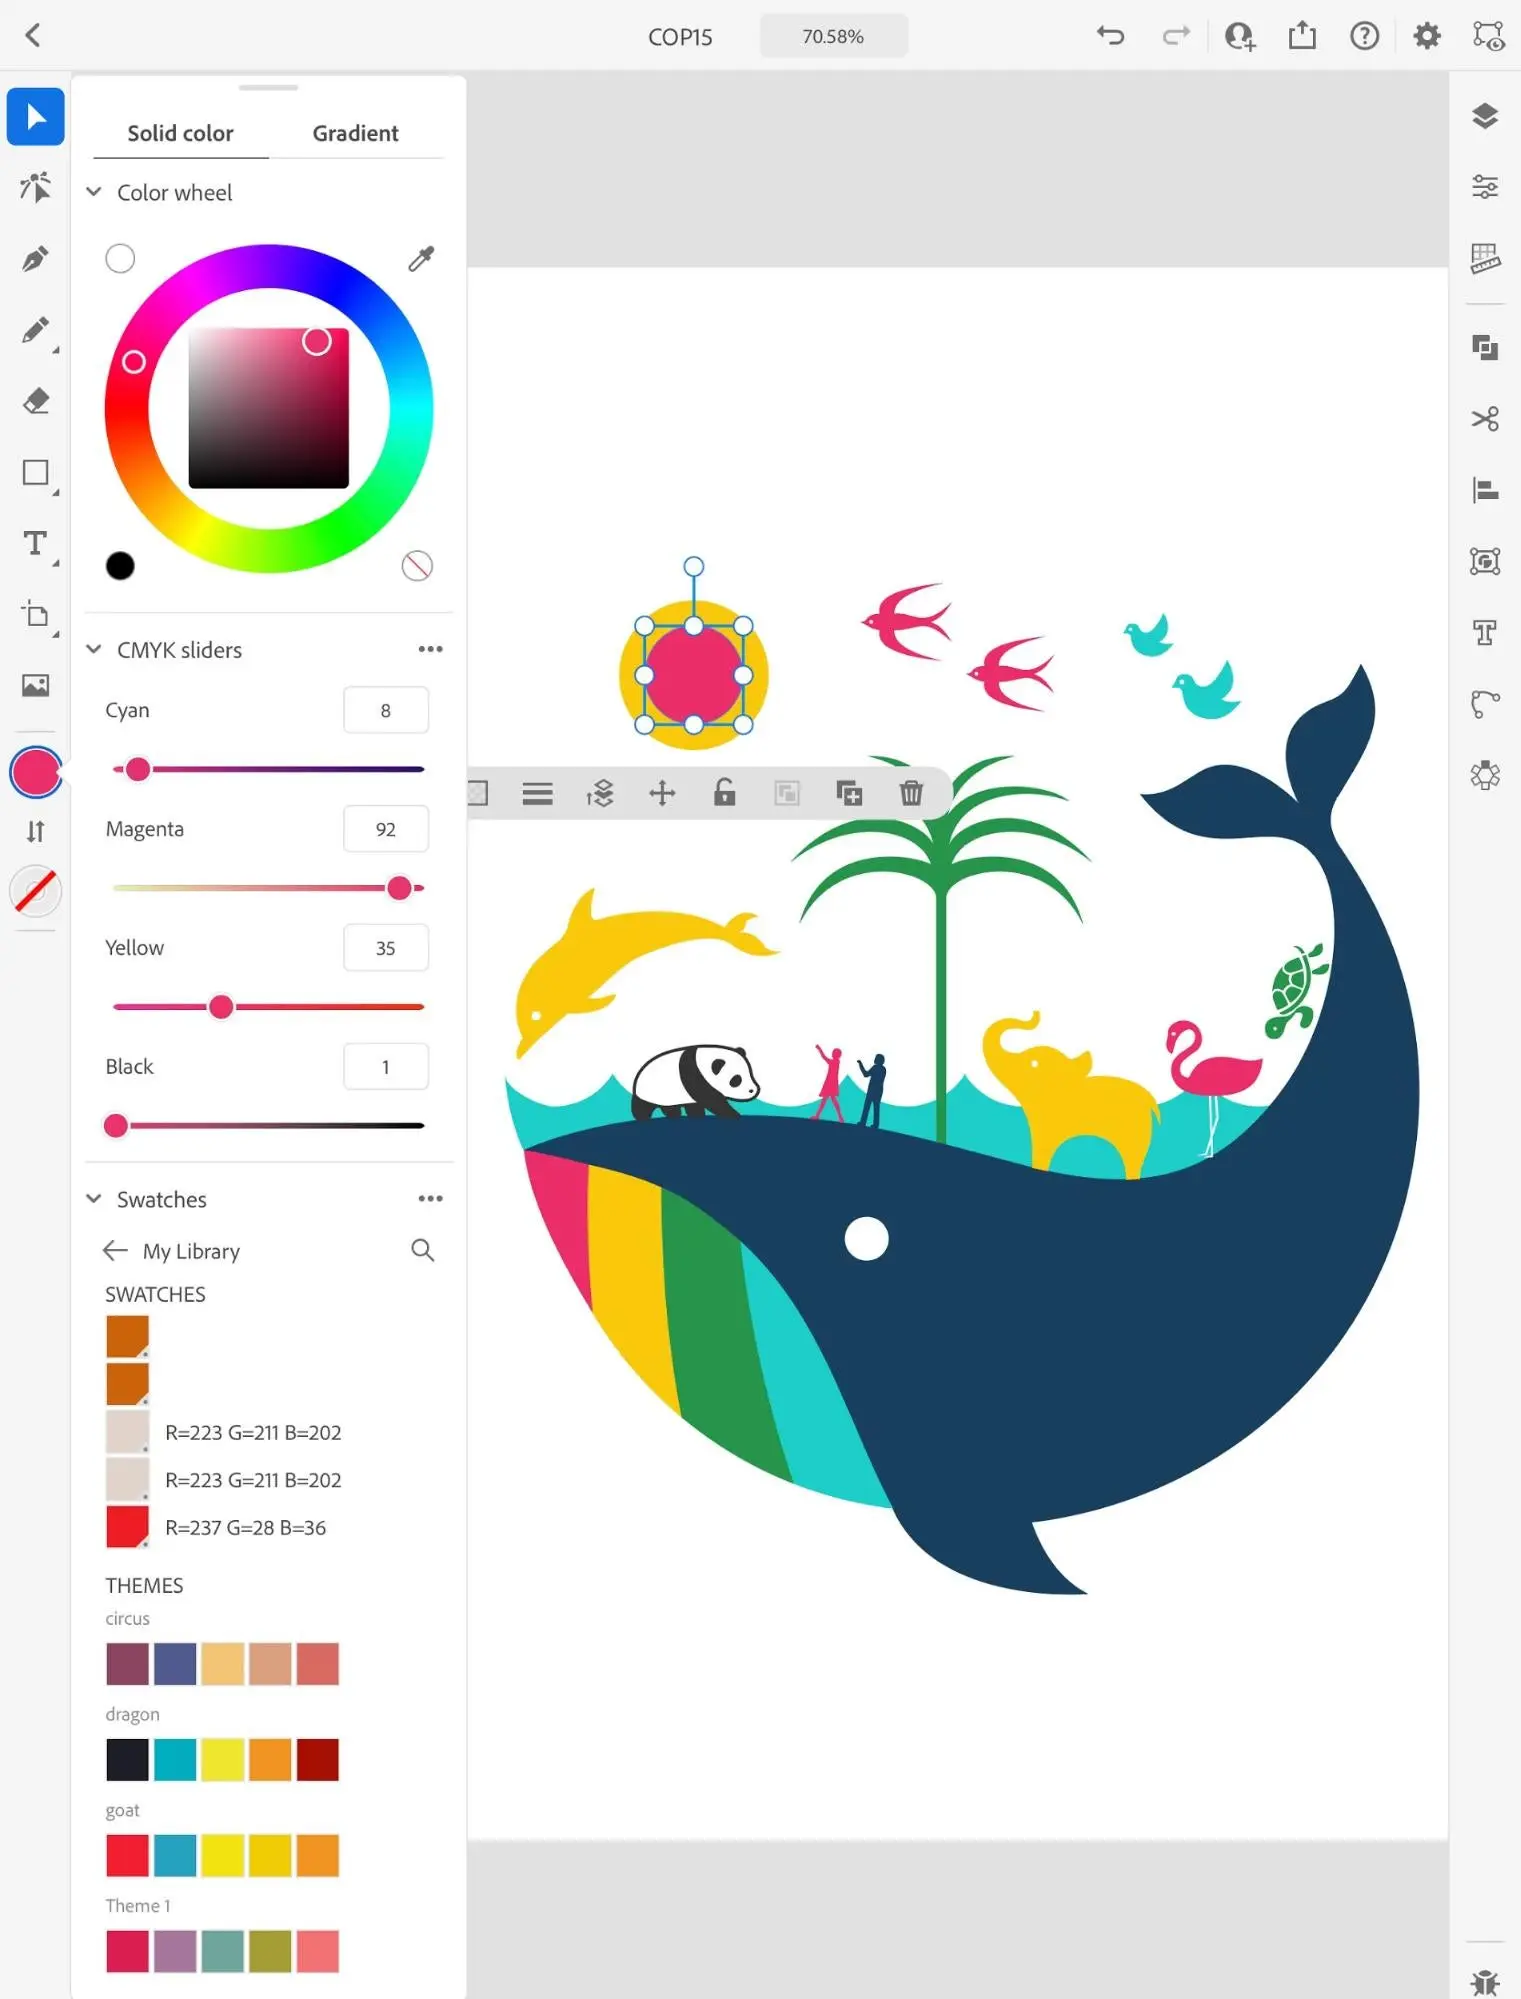 Ilustration of colorful whale with animals on top of it.